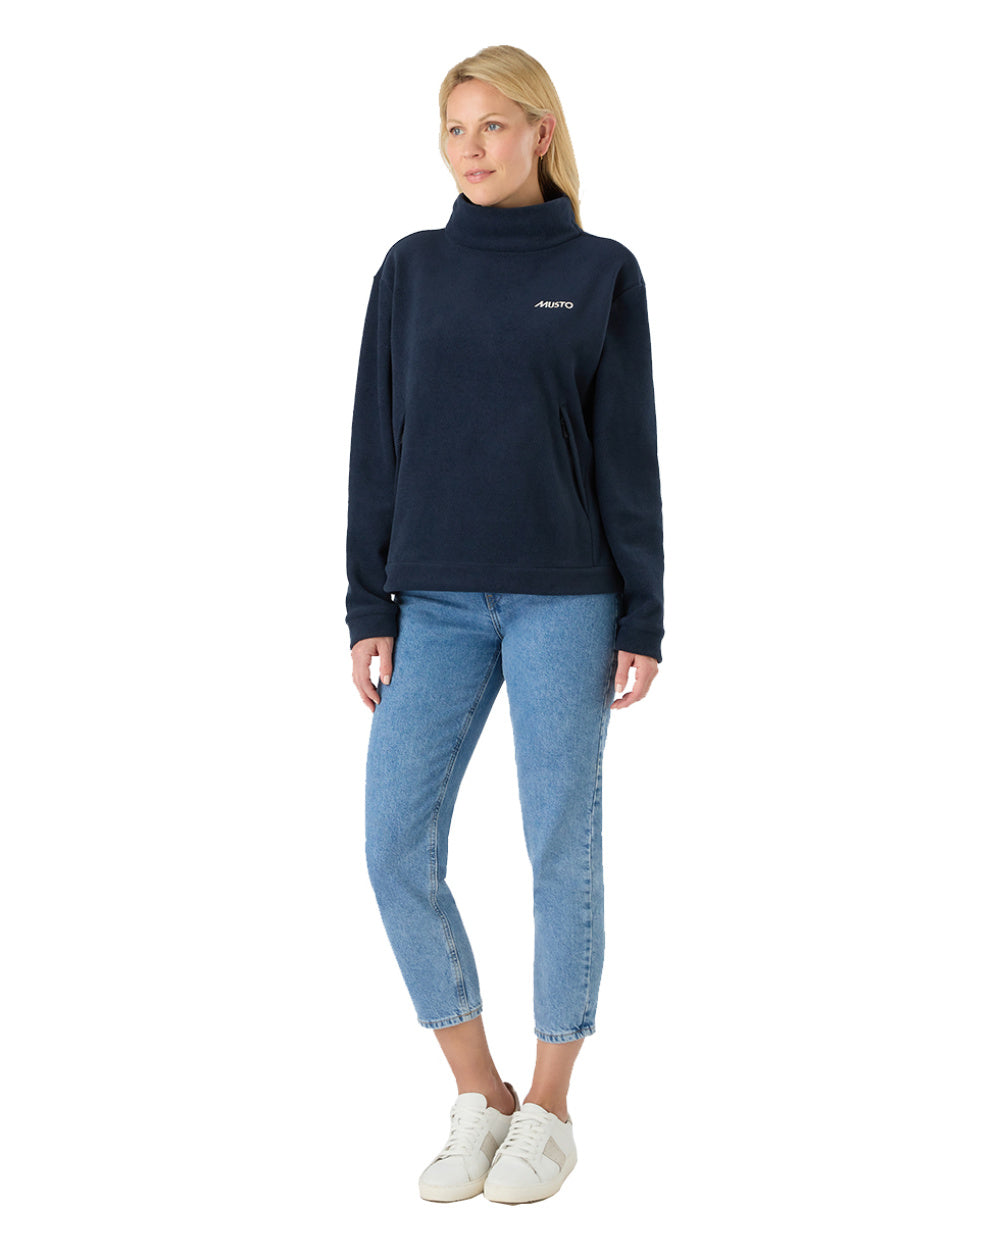 Navy Coloured Musto Womens Classic Fleece Pullover On A White Background 